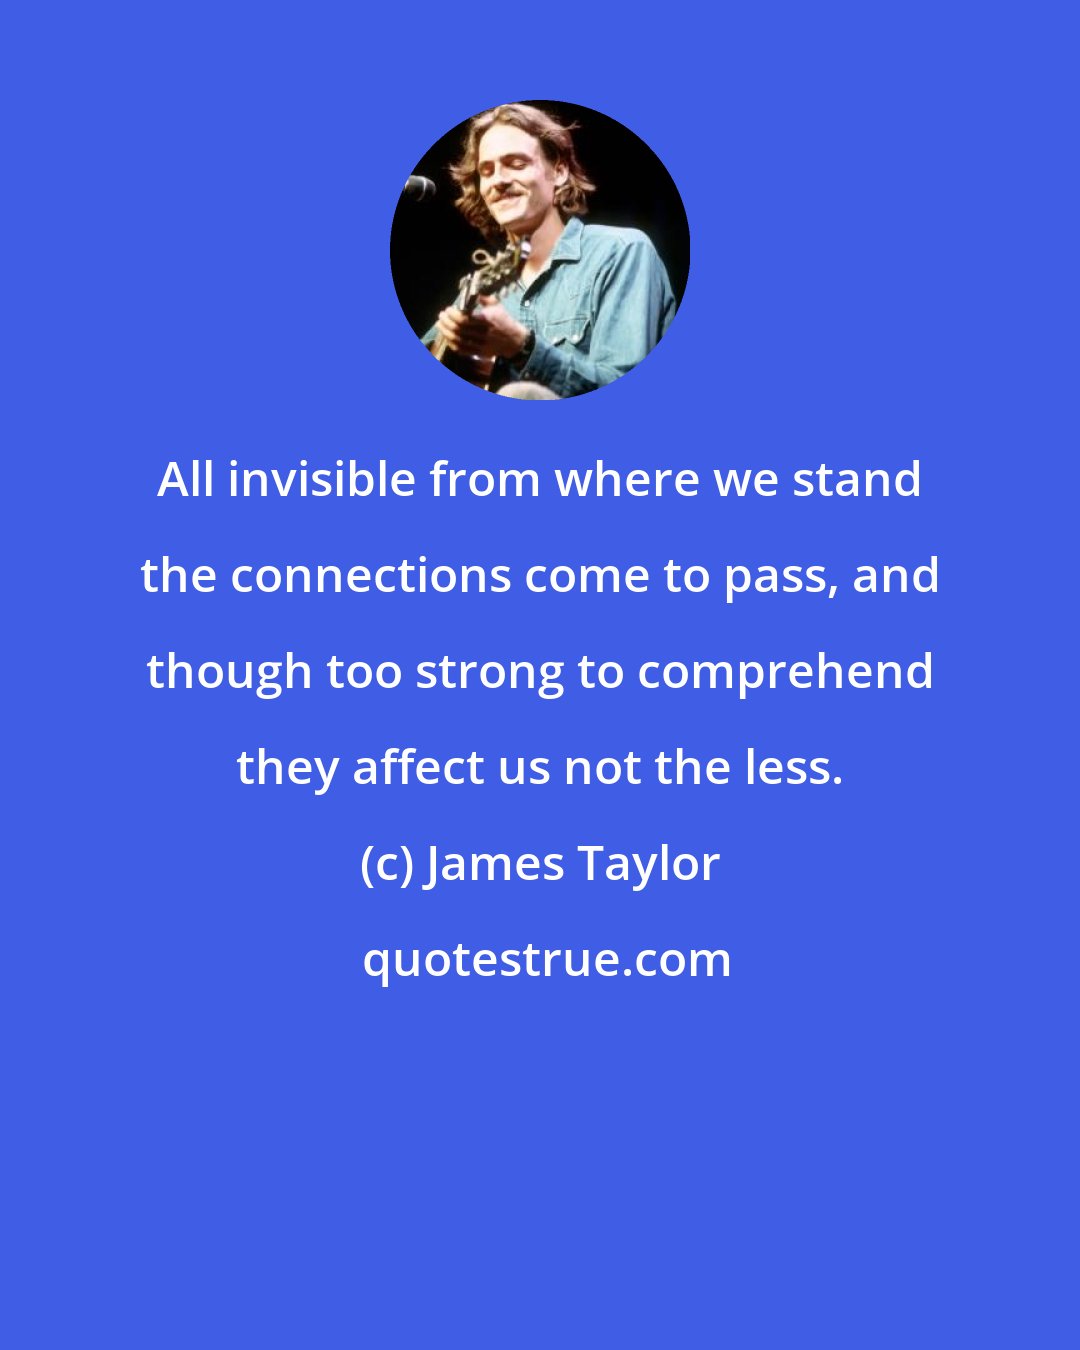 James Taylor: All invisible from where we stand the connections come to pass, and though too strong to comprehend they affect us not the less.